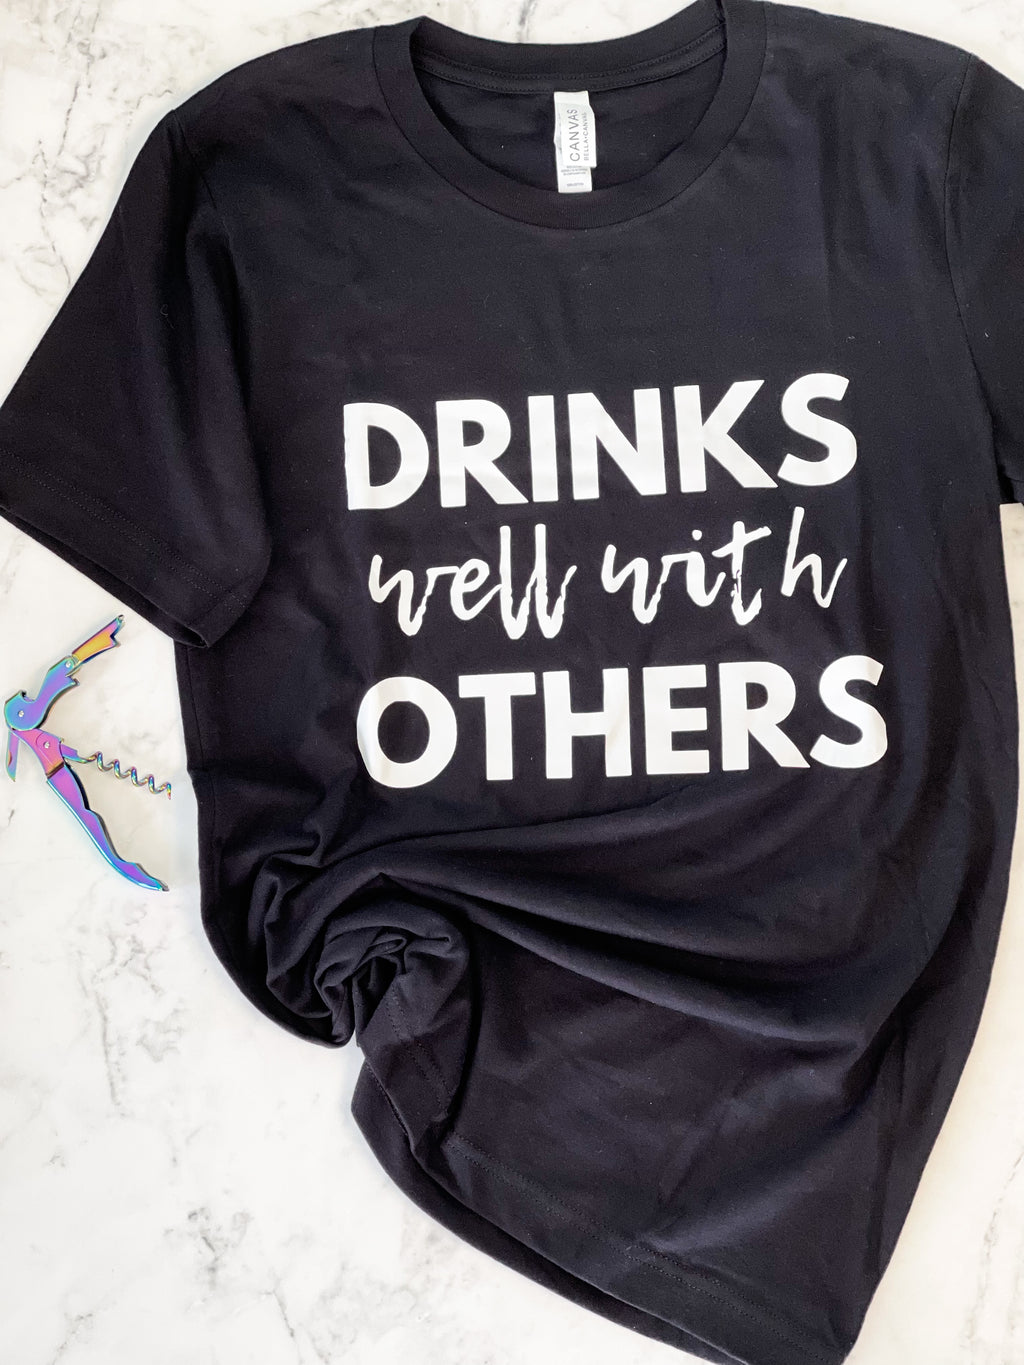 SALE! LIMITED SIZES LEFT - InBooze Drinks Well With Others T-shirt